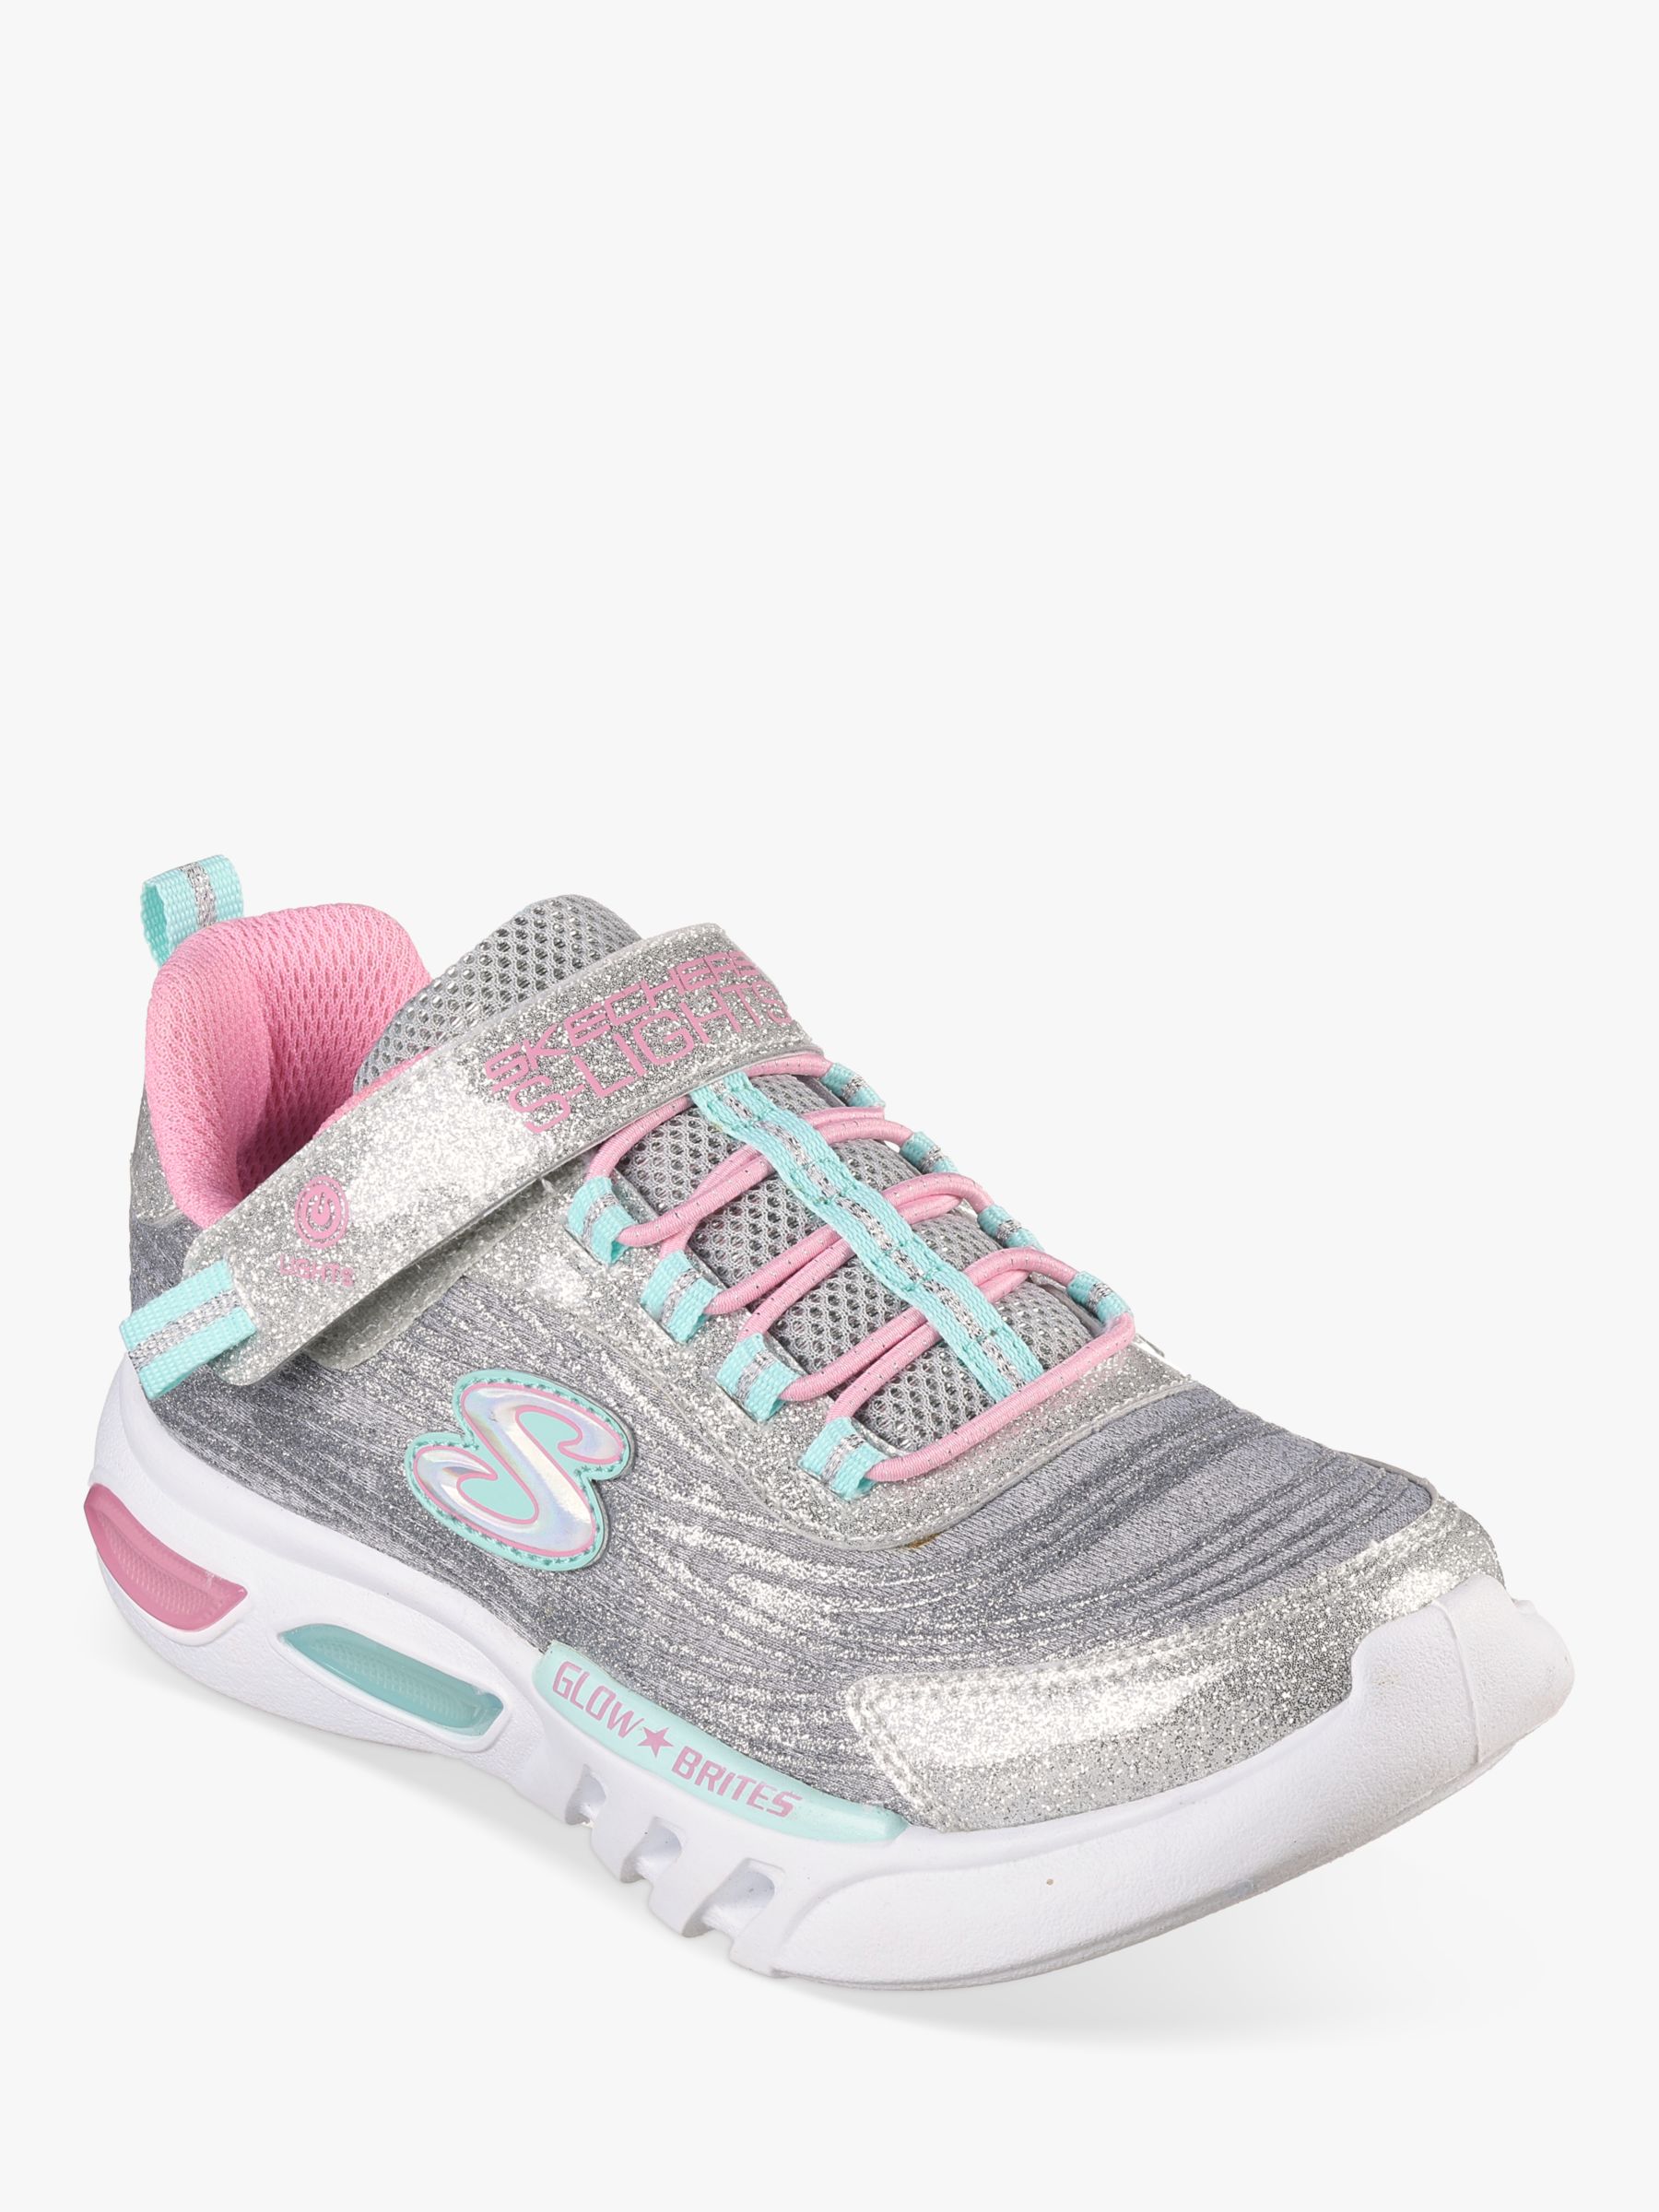 Skechers Kids' S Lights Glow-Brites Dazzle Force Light Up Trainers at Lewis & Partners